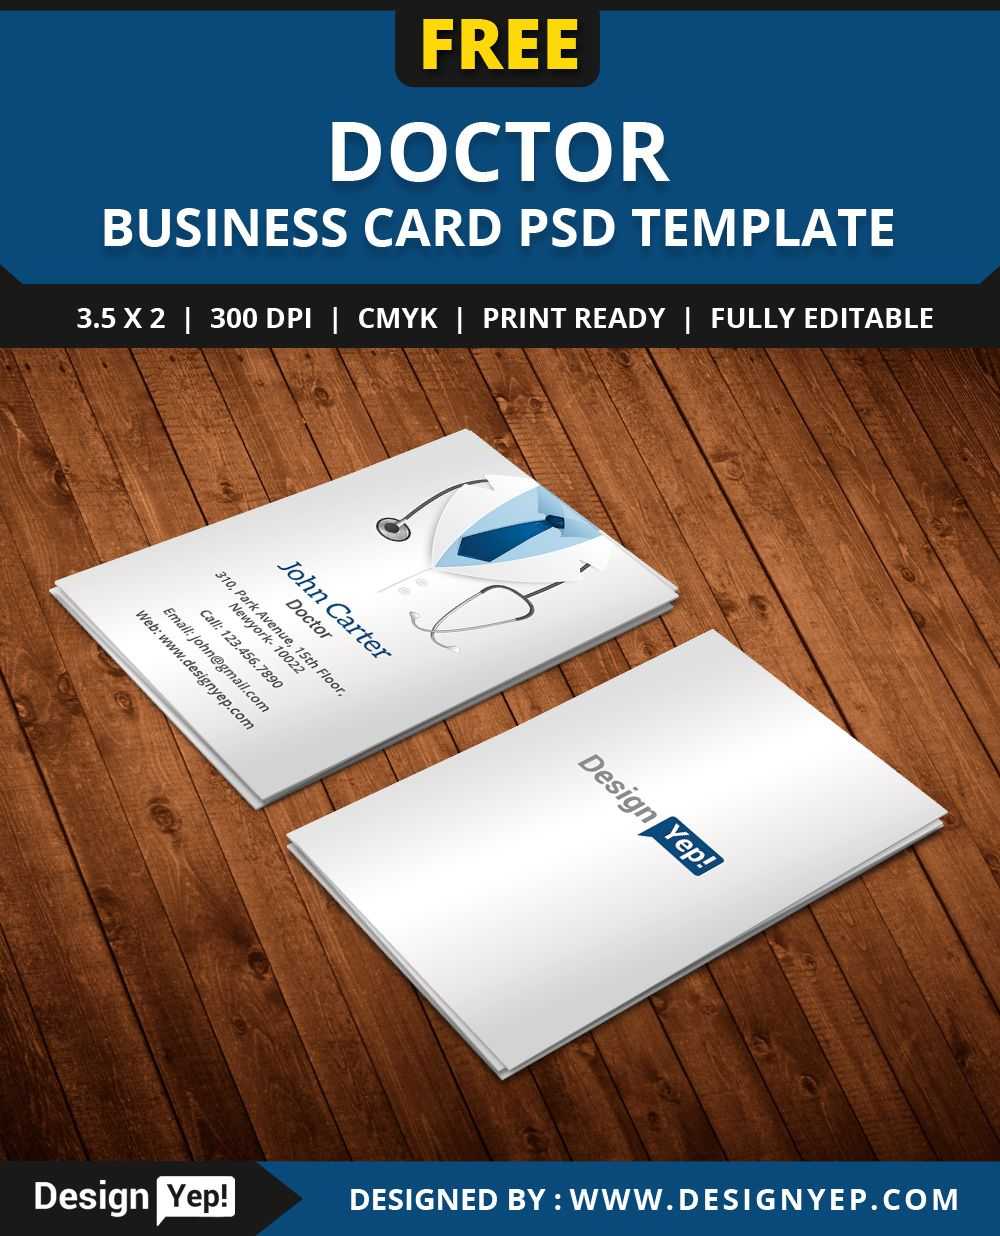 Free Doctor Business Card Template Psd | Business Card Psd For Medical Business Cards Templates Free